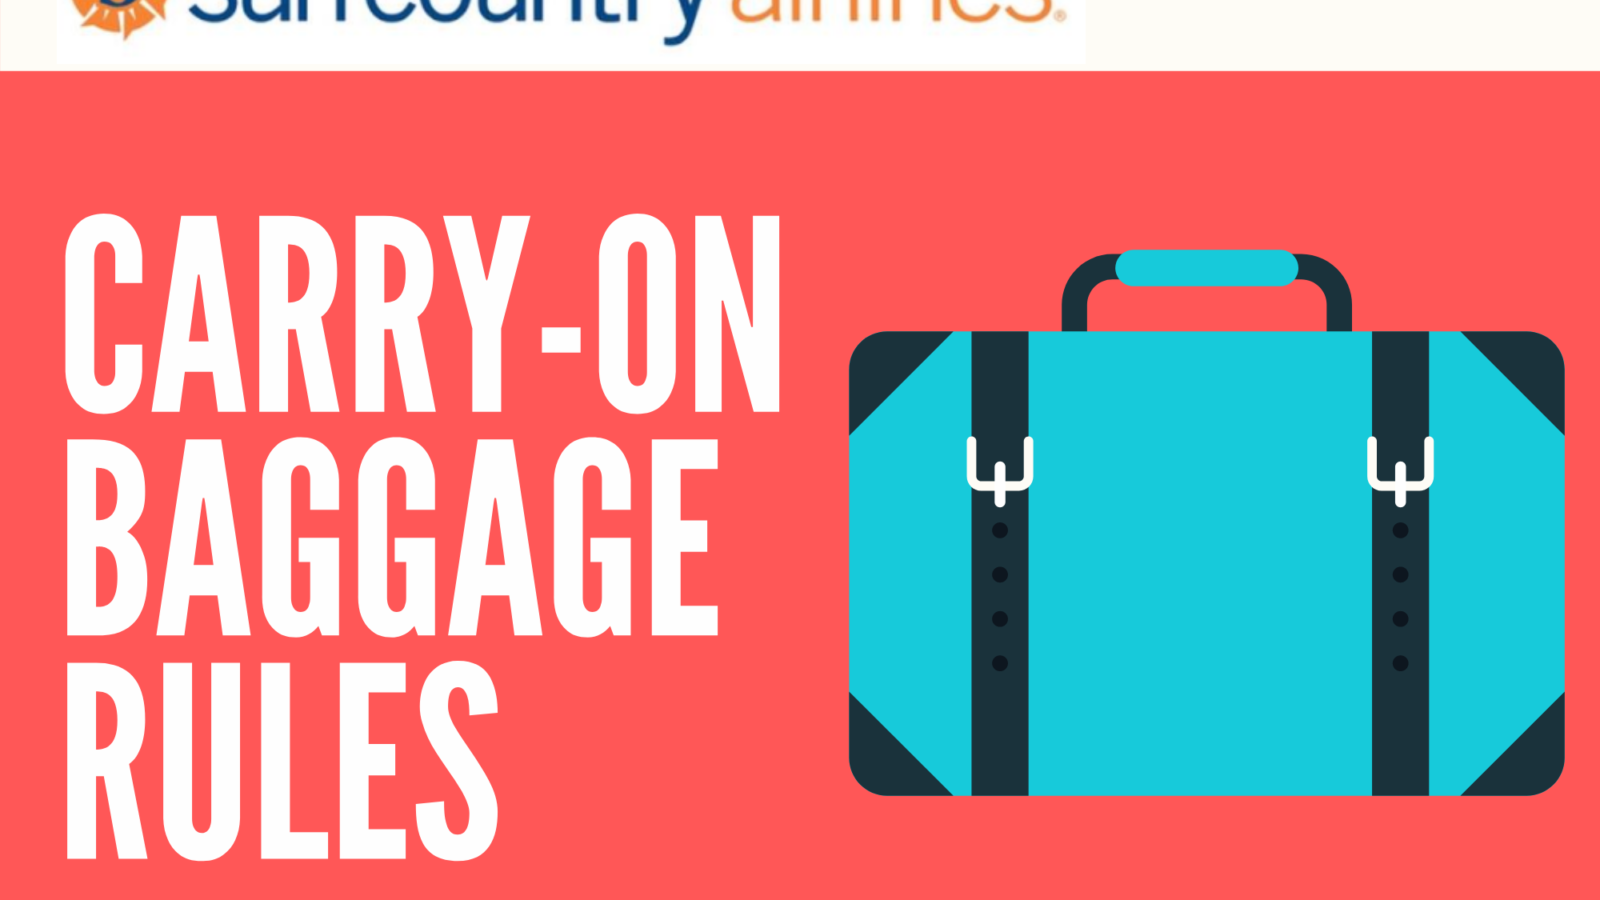 Sun country airlines apple wallet information